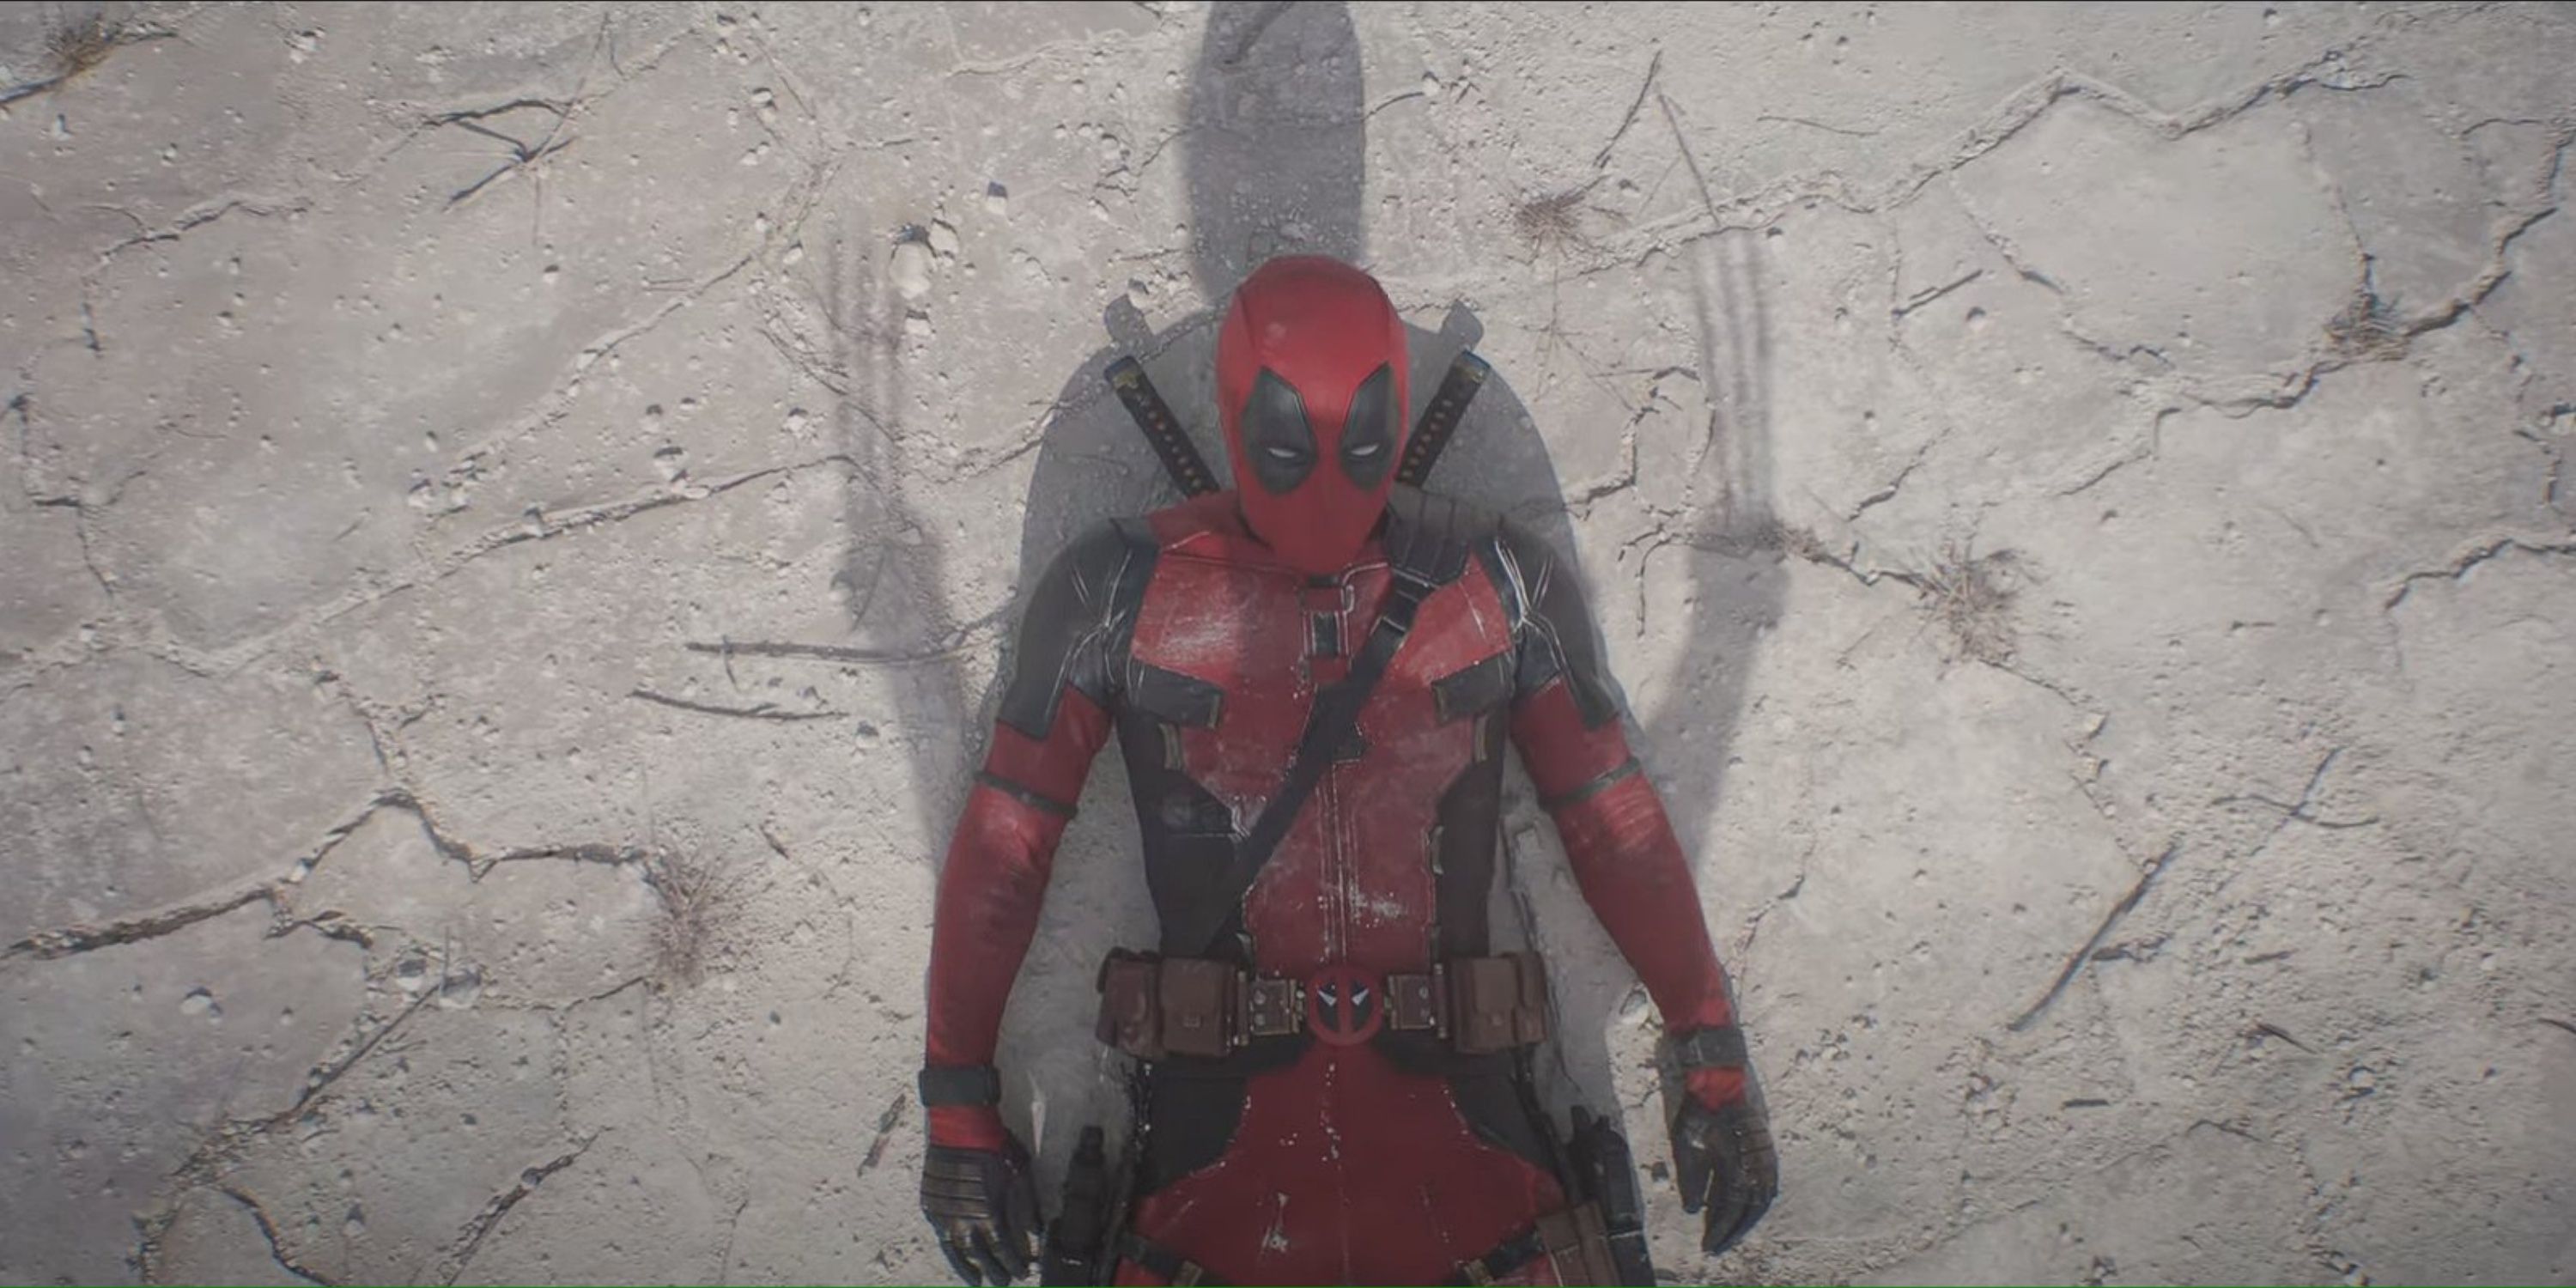 deadpool on the floor with wolverine's shadow over him